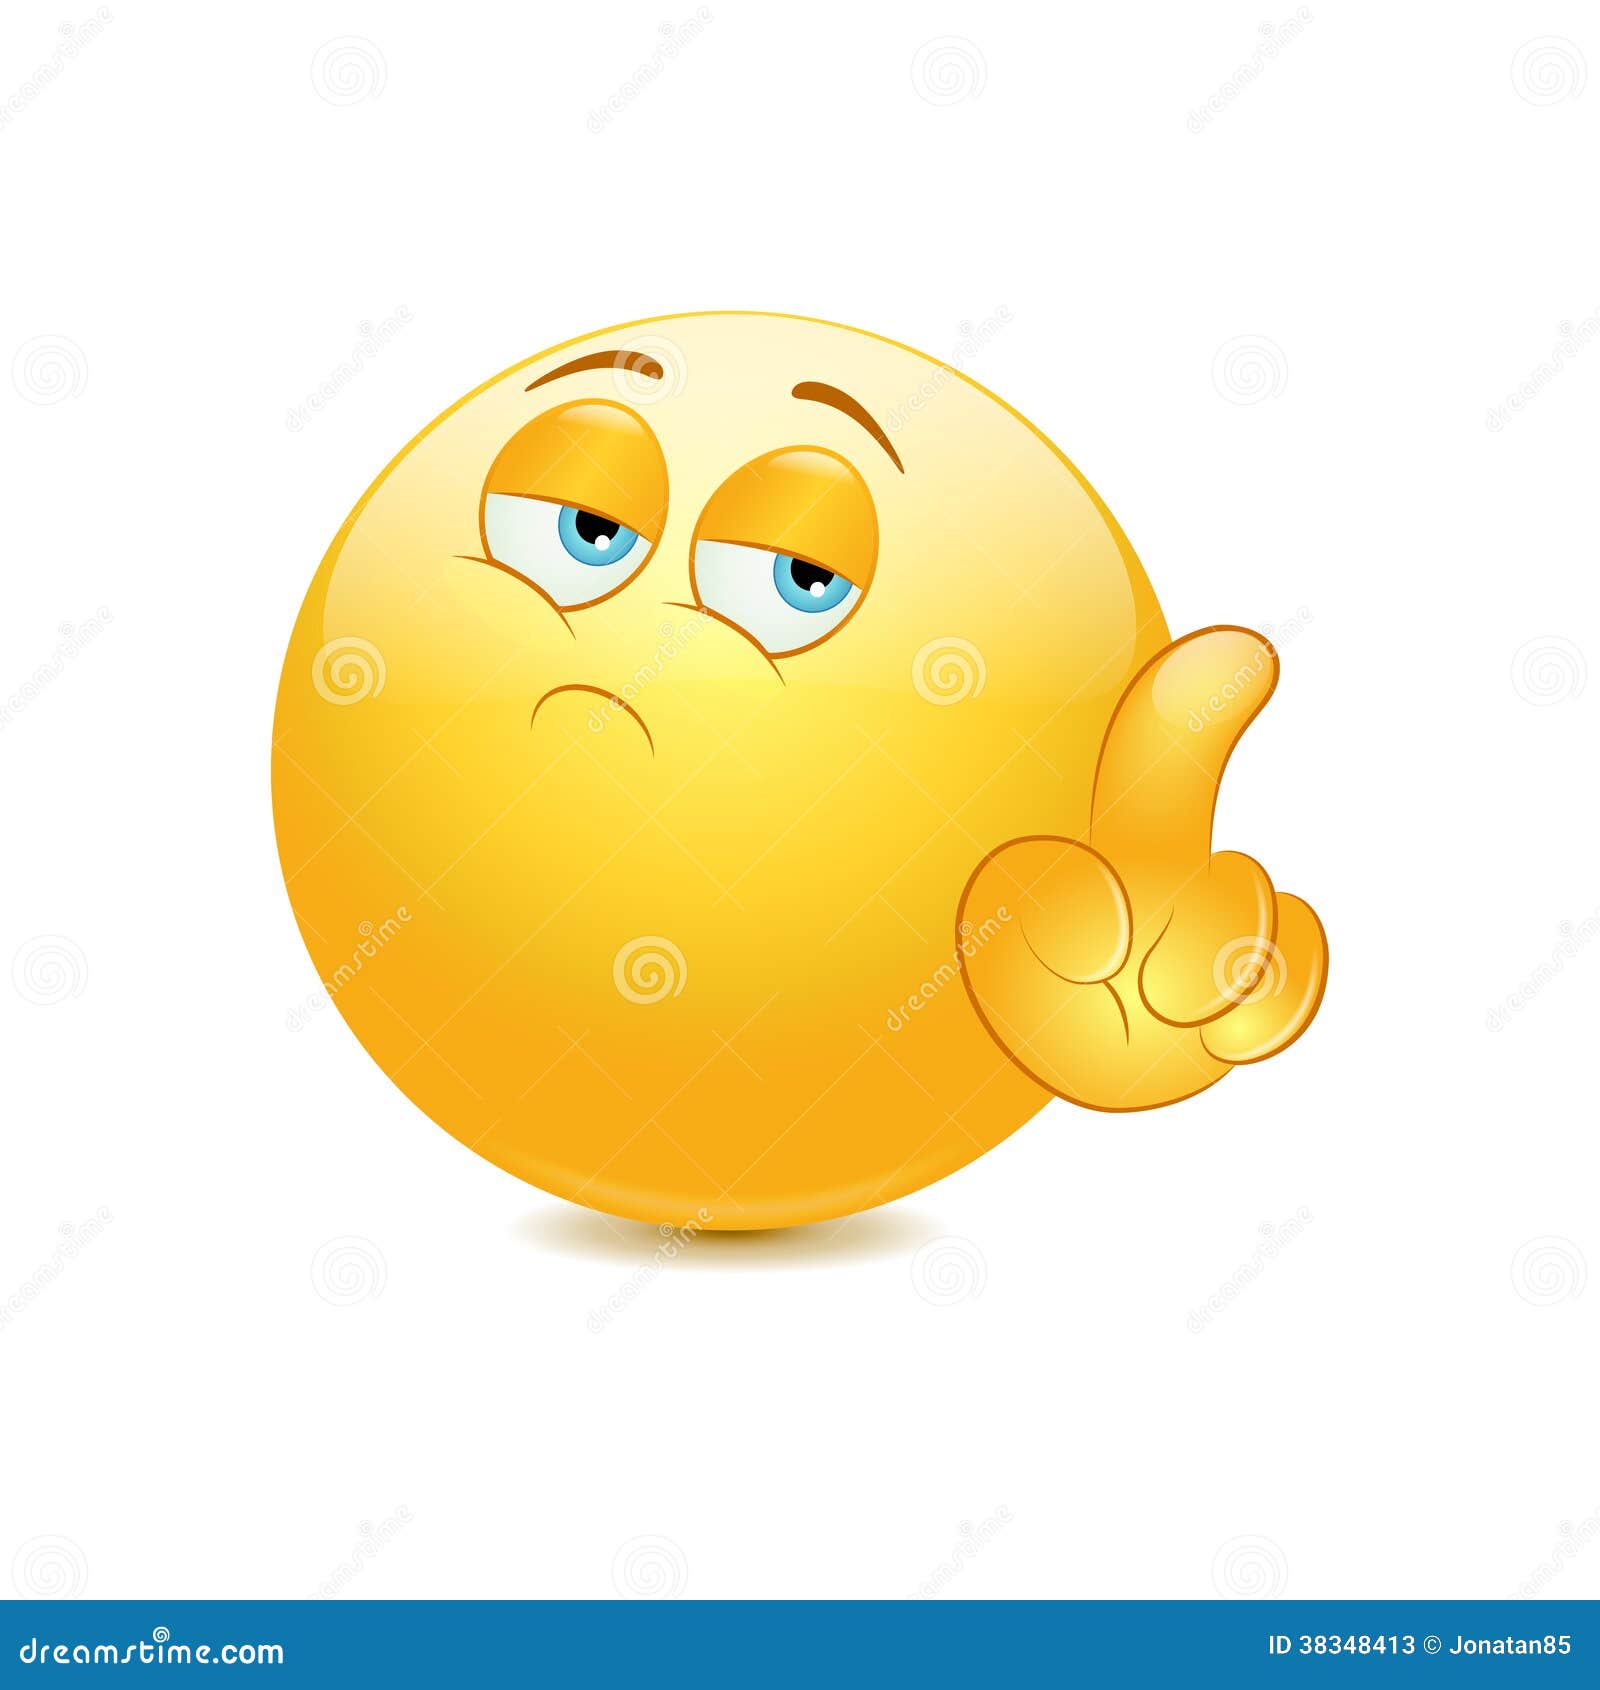 emoticon-saying-no-his-finger-file-eps-format-38348413.jpg